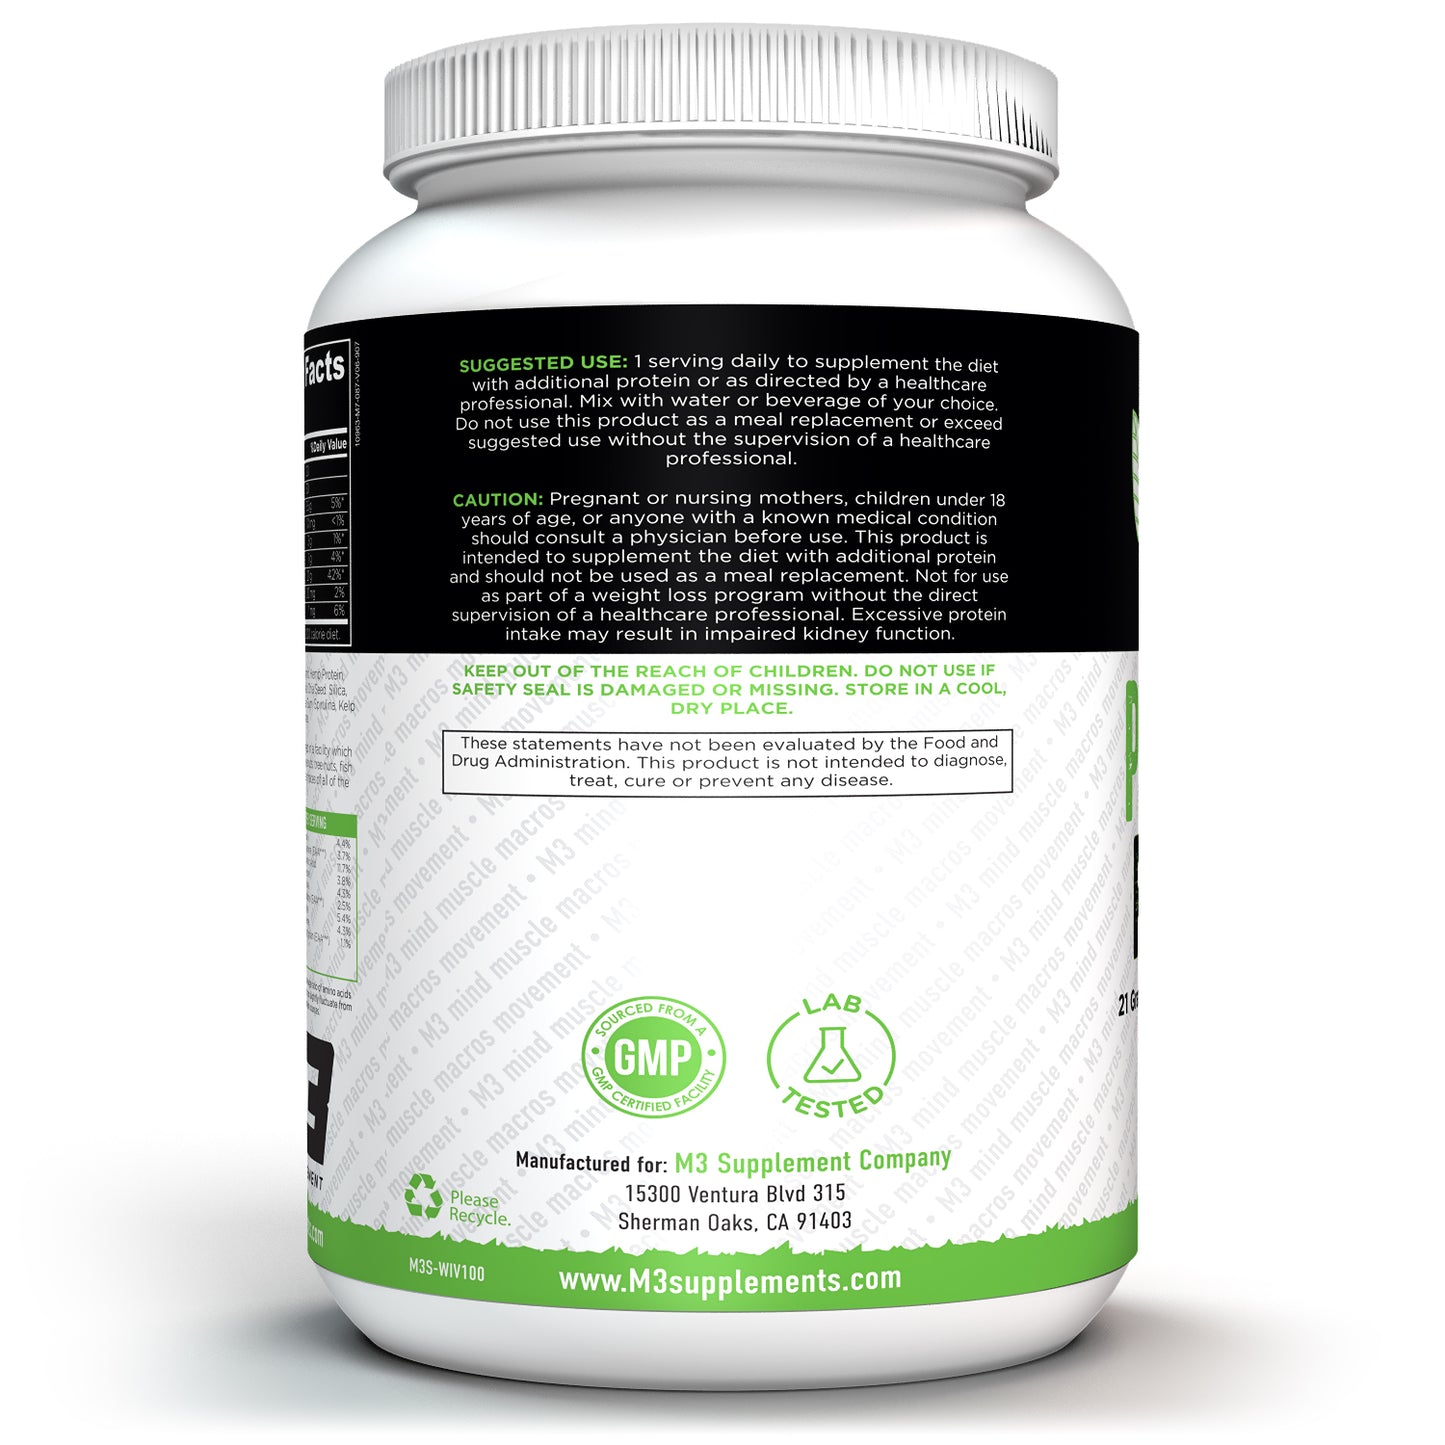 M3 Vegan Plant Based Protein Powder. 21 Grams of Protein per serving. 3 Grams of Carbs per serving. This protein is Cholesterol Free and Low in Sodium. Vanilla fllavor and is a dietery supplement.